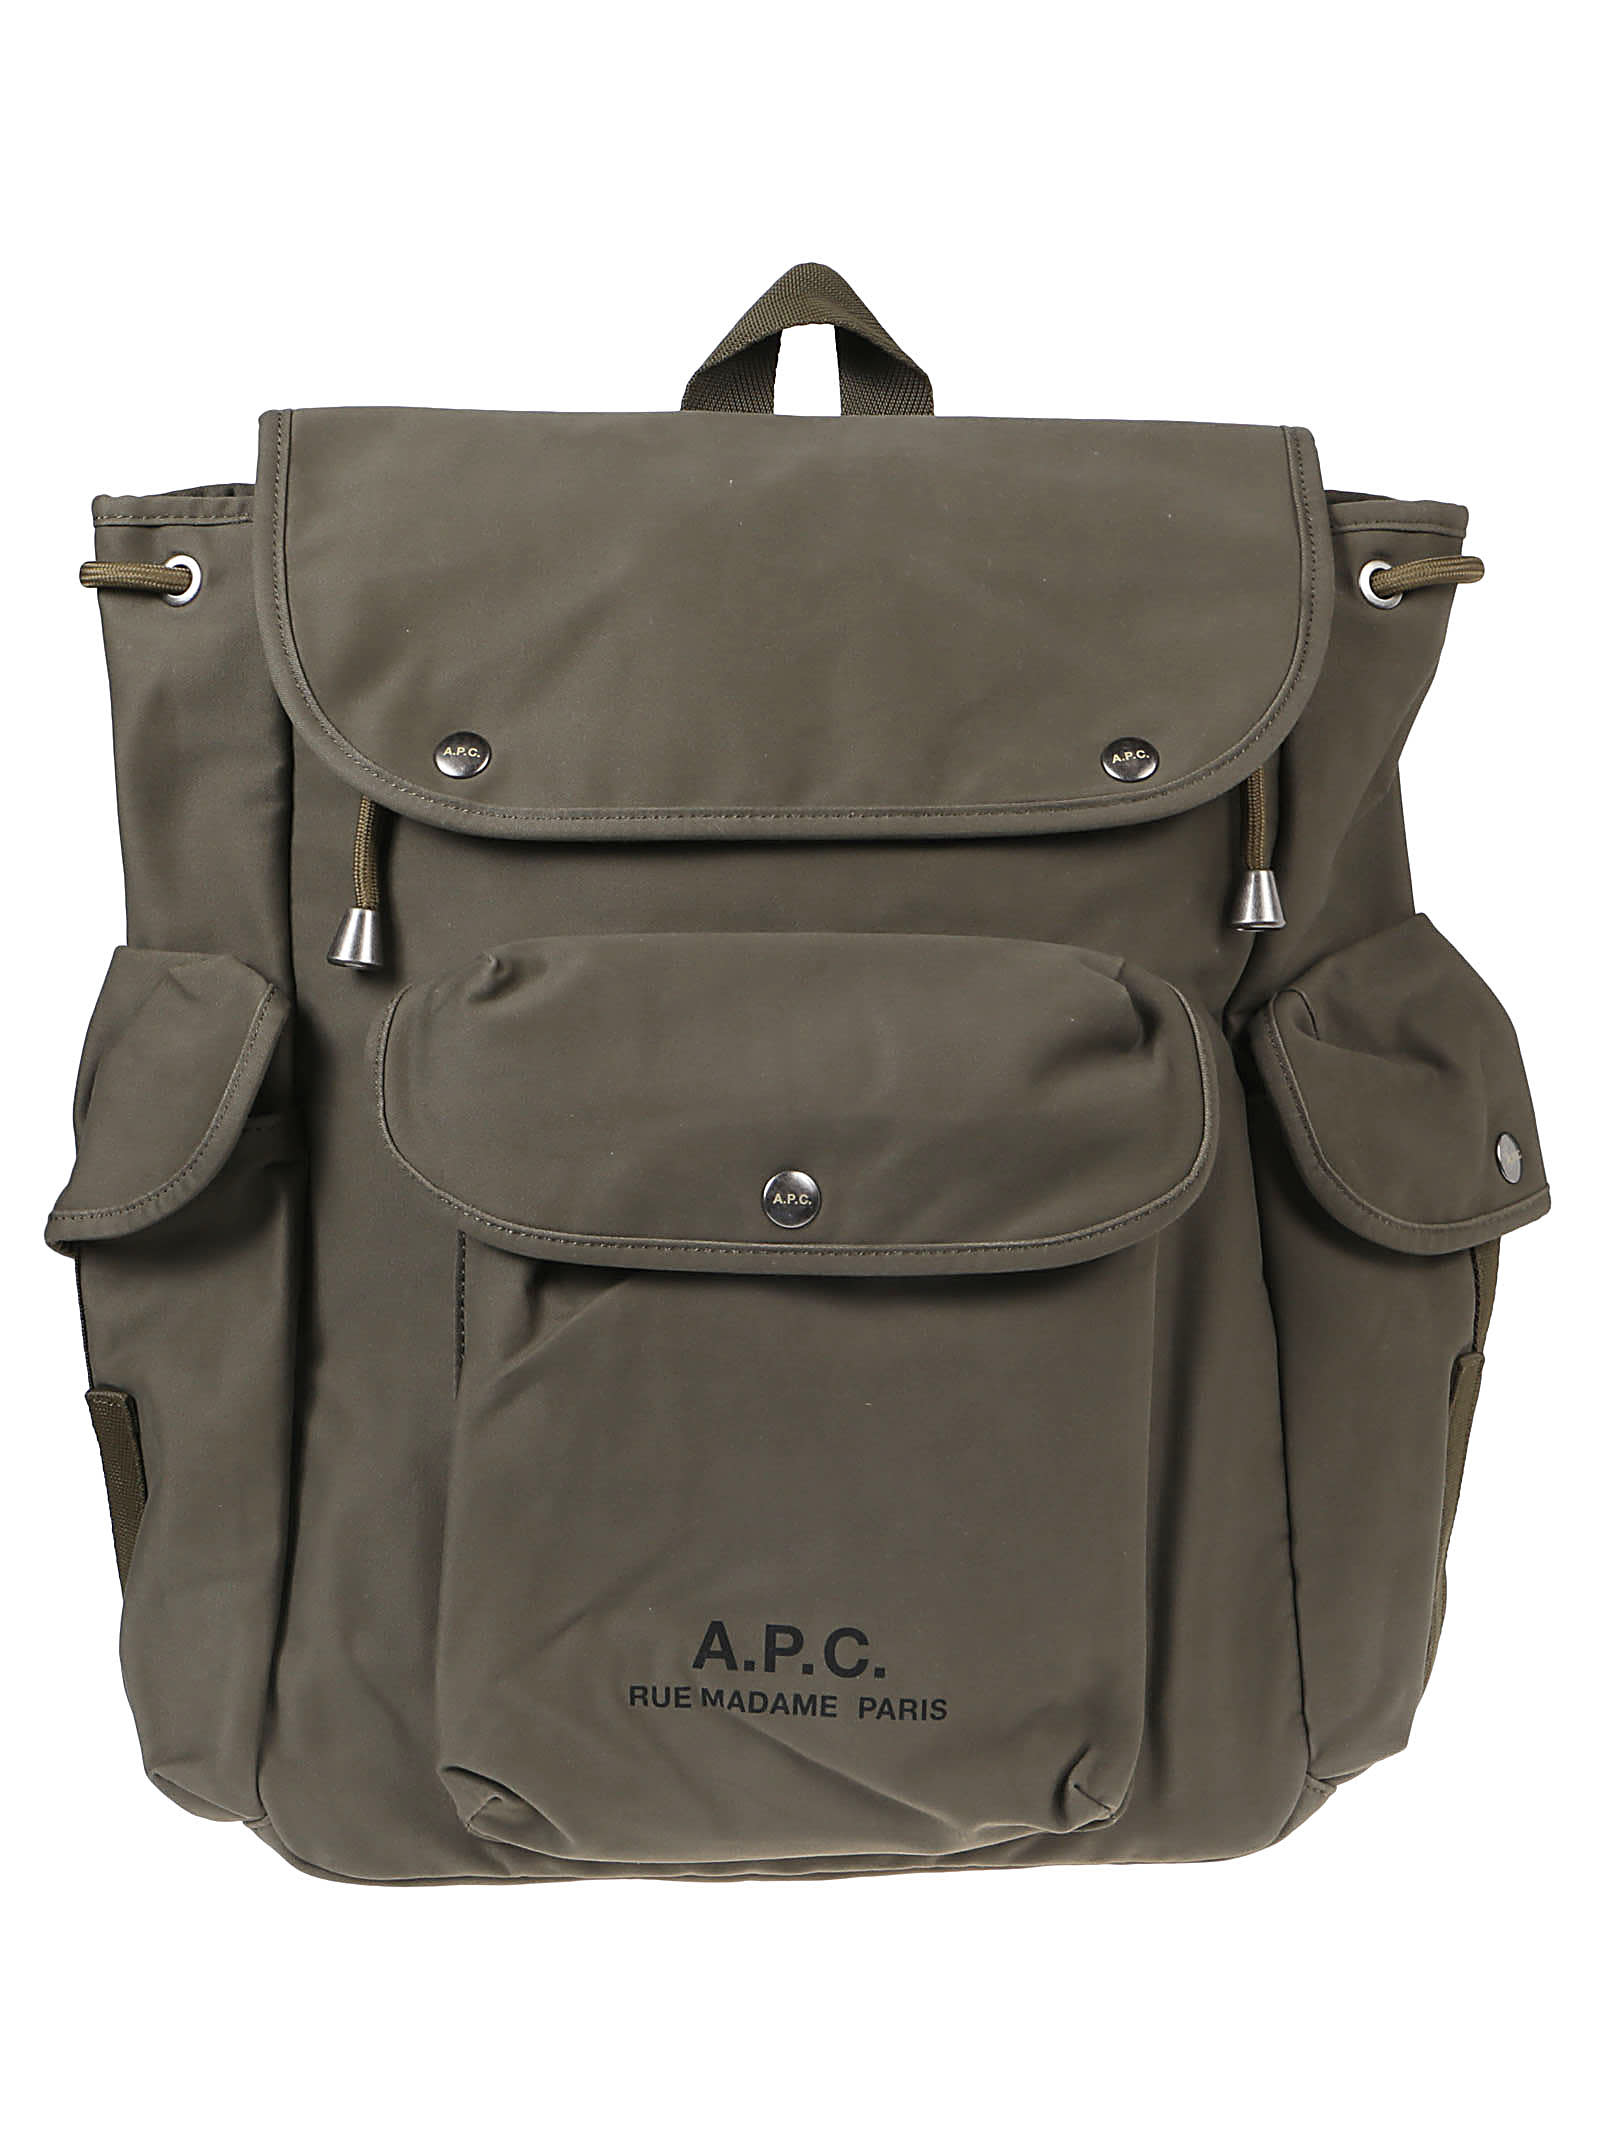 A.P.C. Recuperation 2.0 Backpack